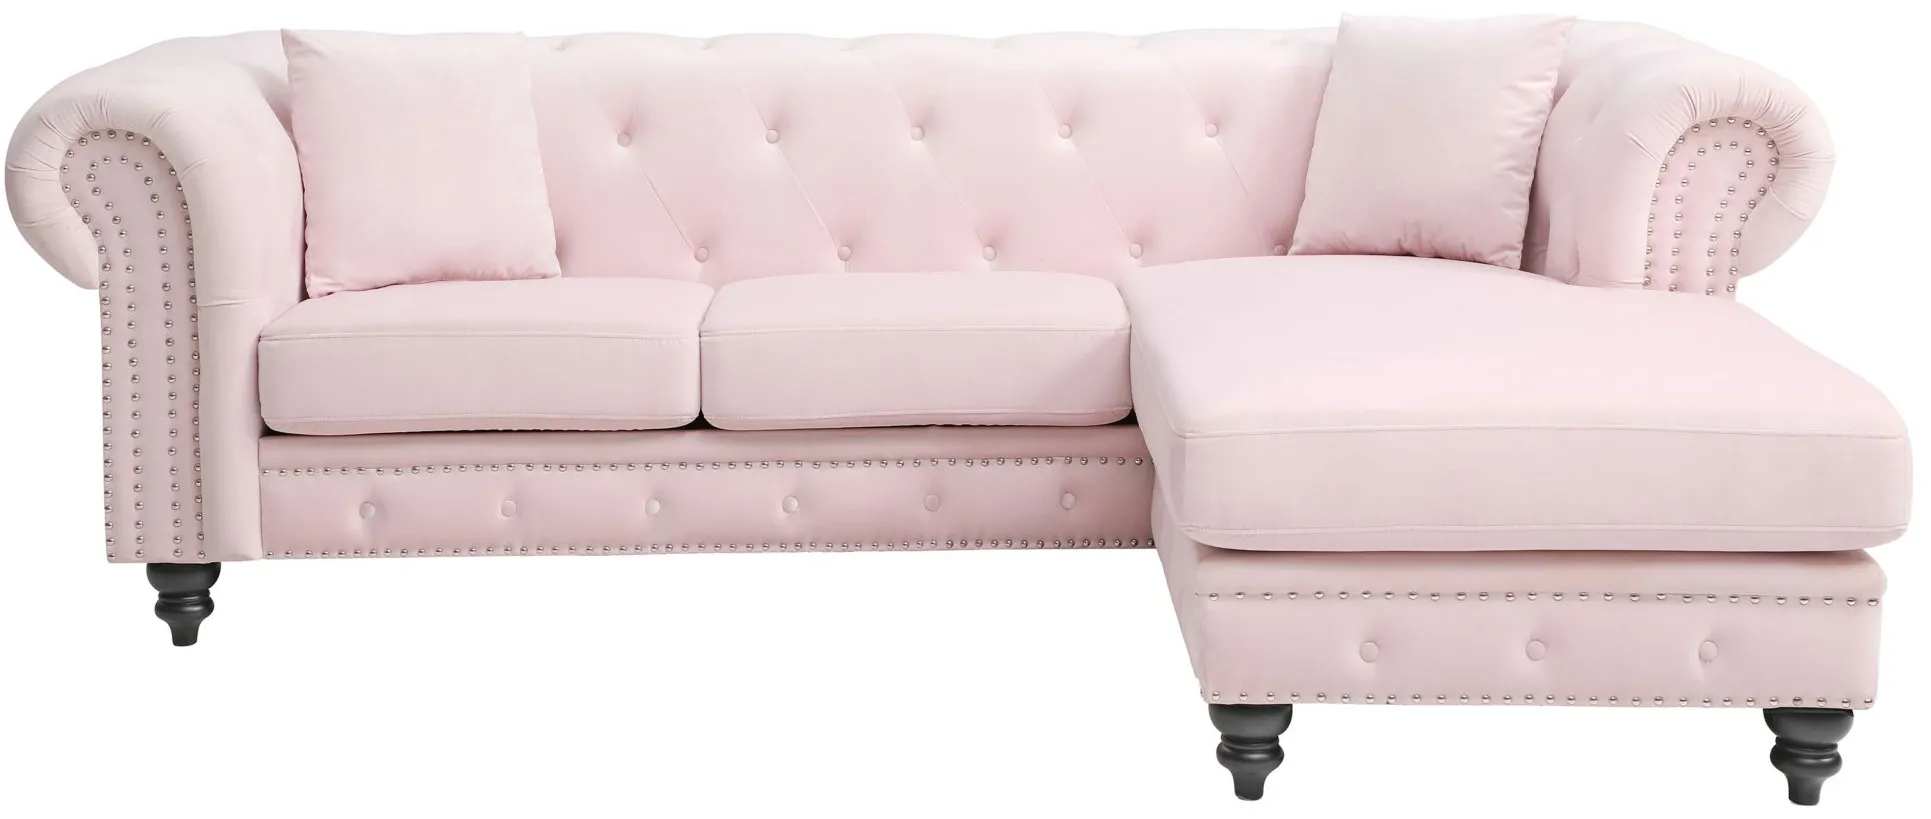 Nola 2-pc. Sectional Sofa in Pink by Glory Furniture